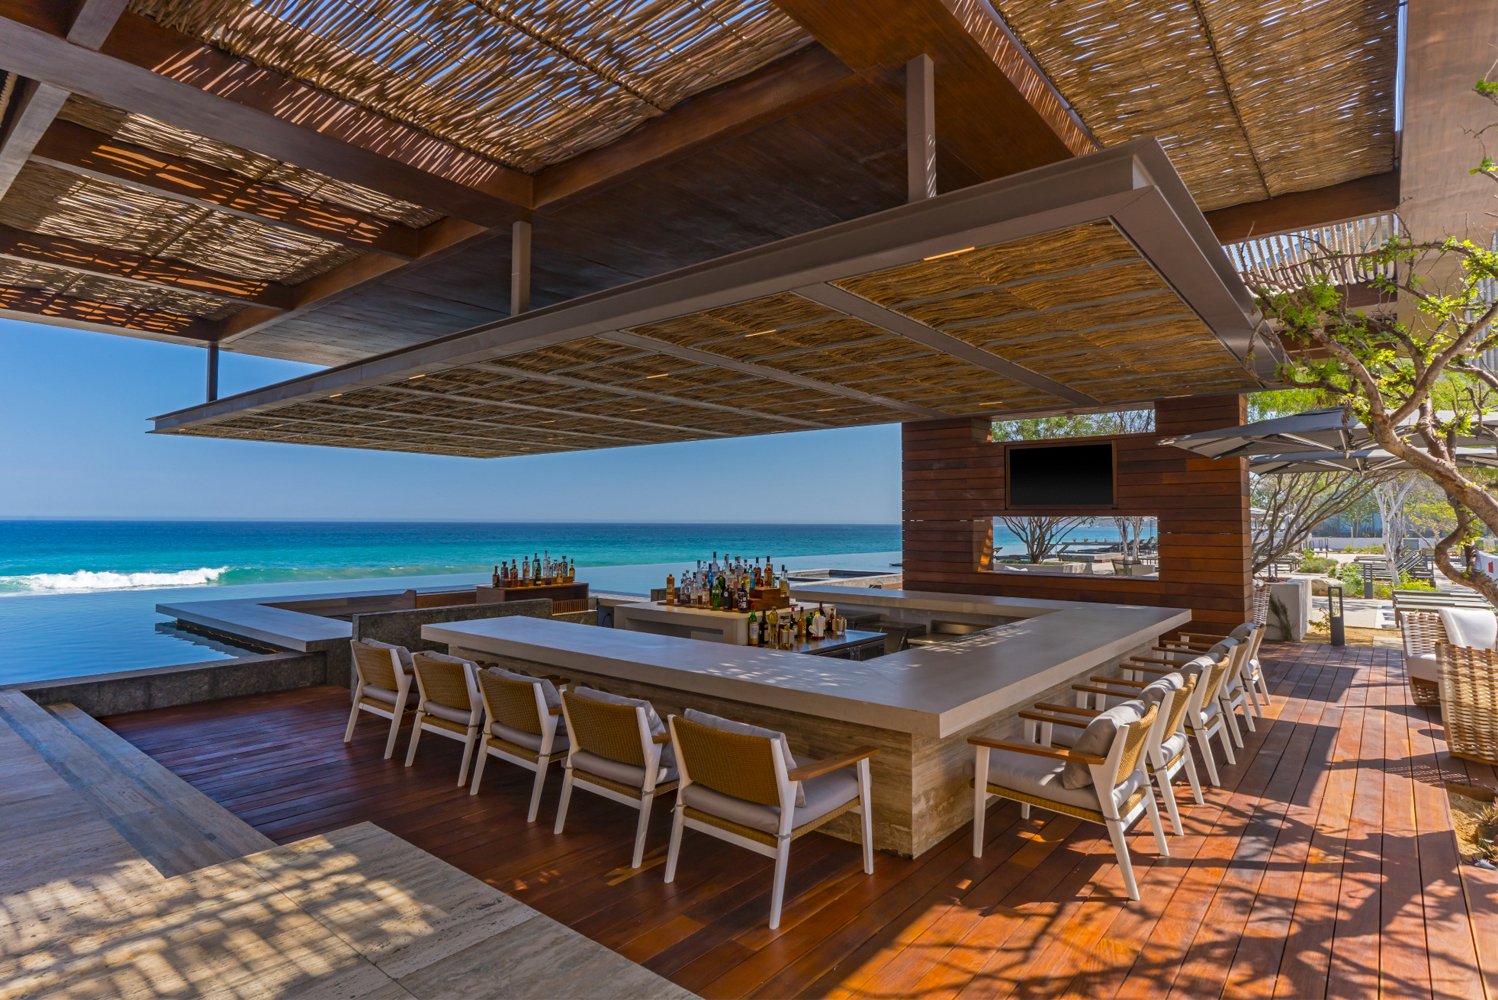 Solaz a Luxury Collection Resort Los Cabos is scheduled to open on September 1